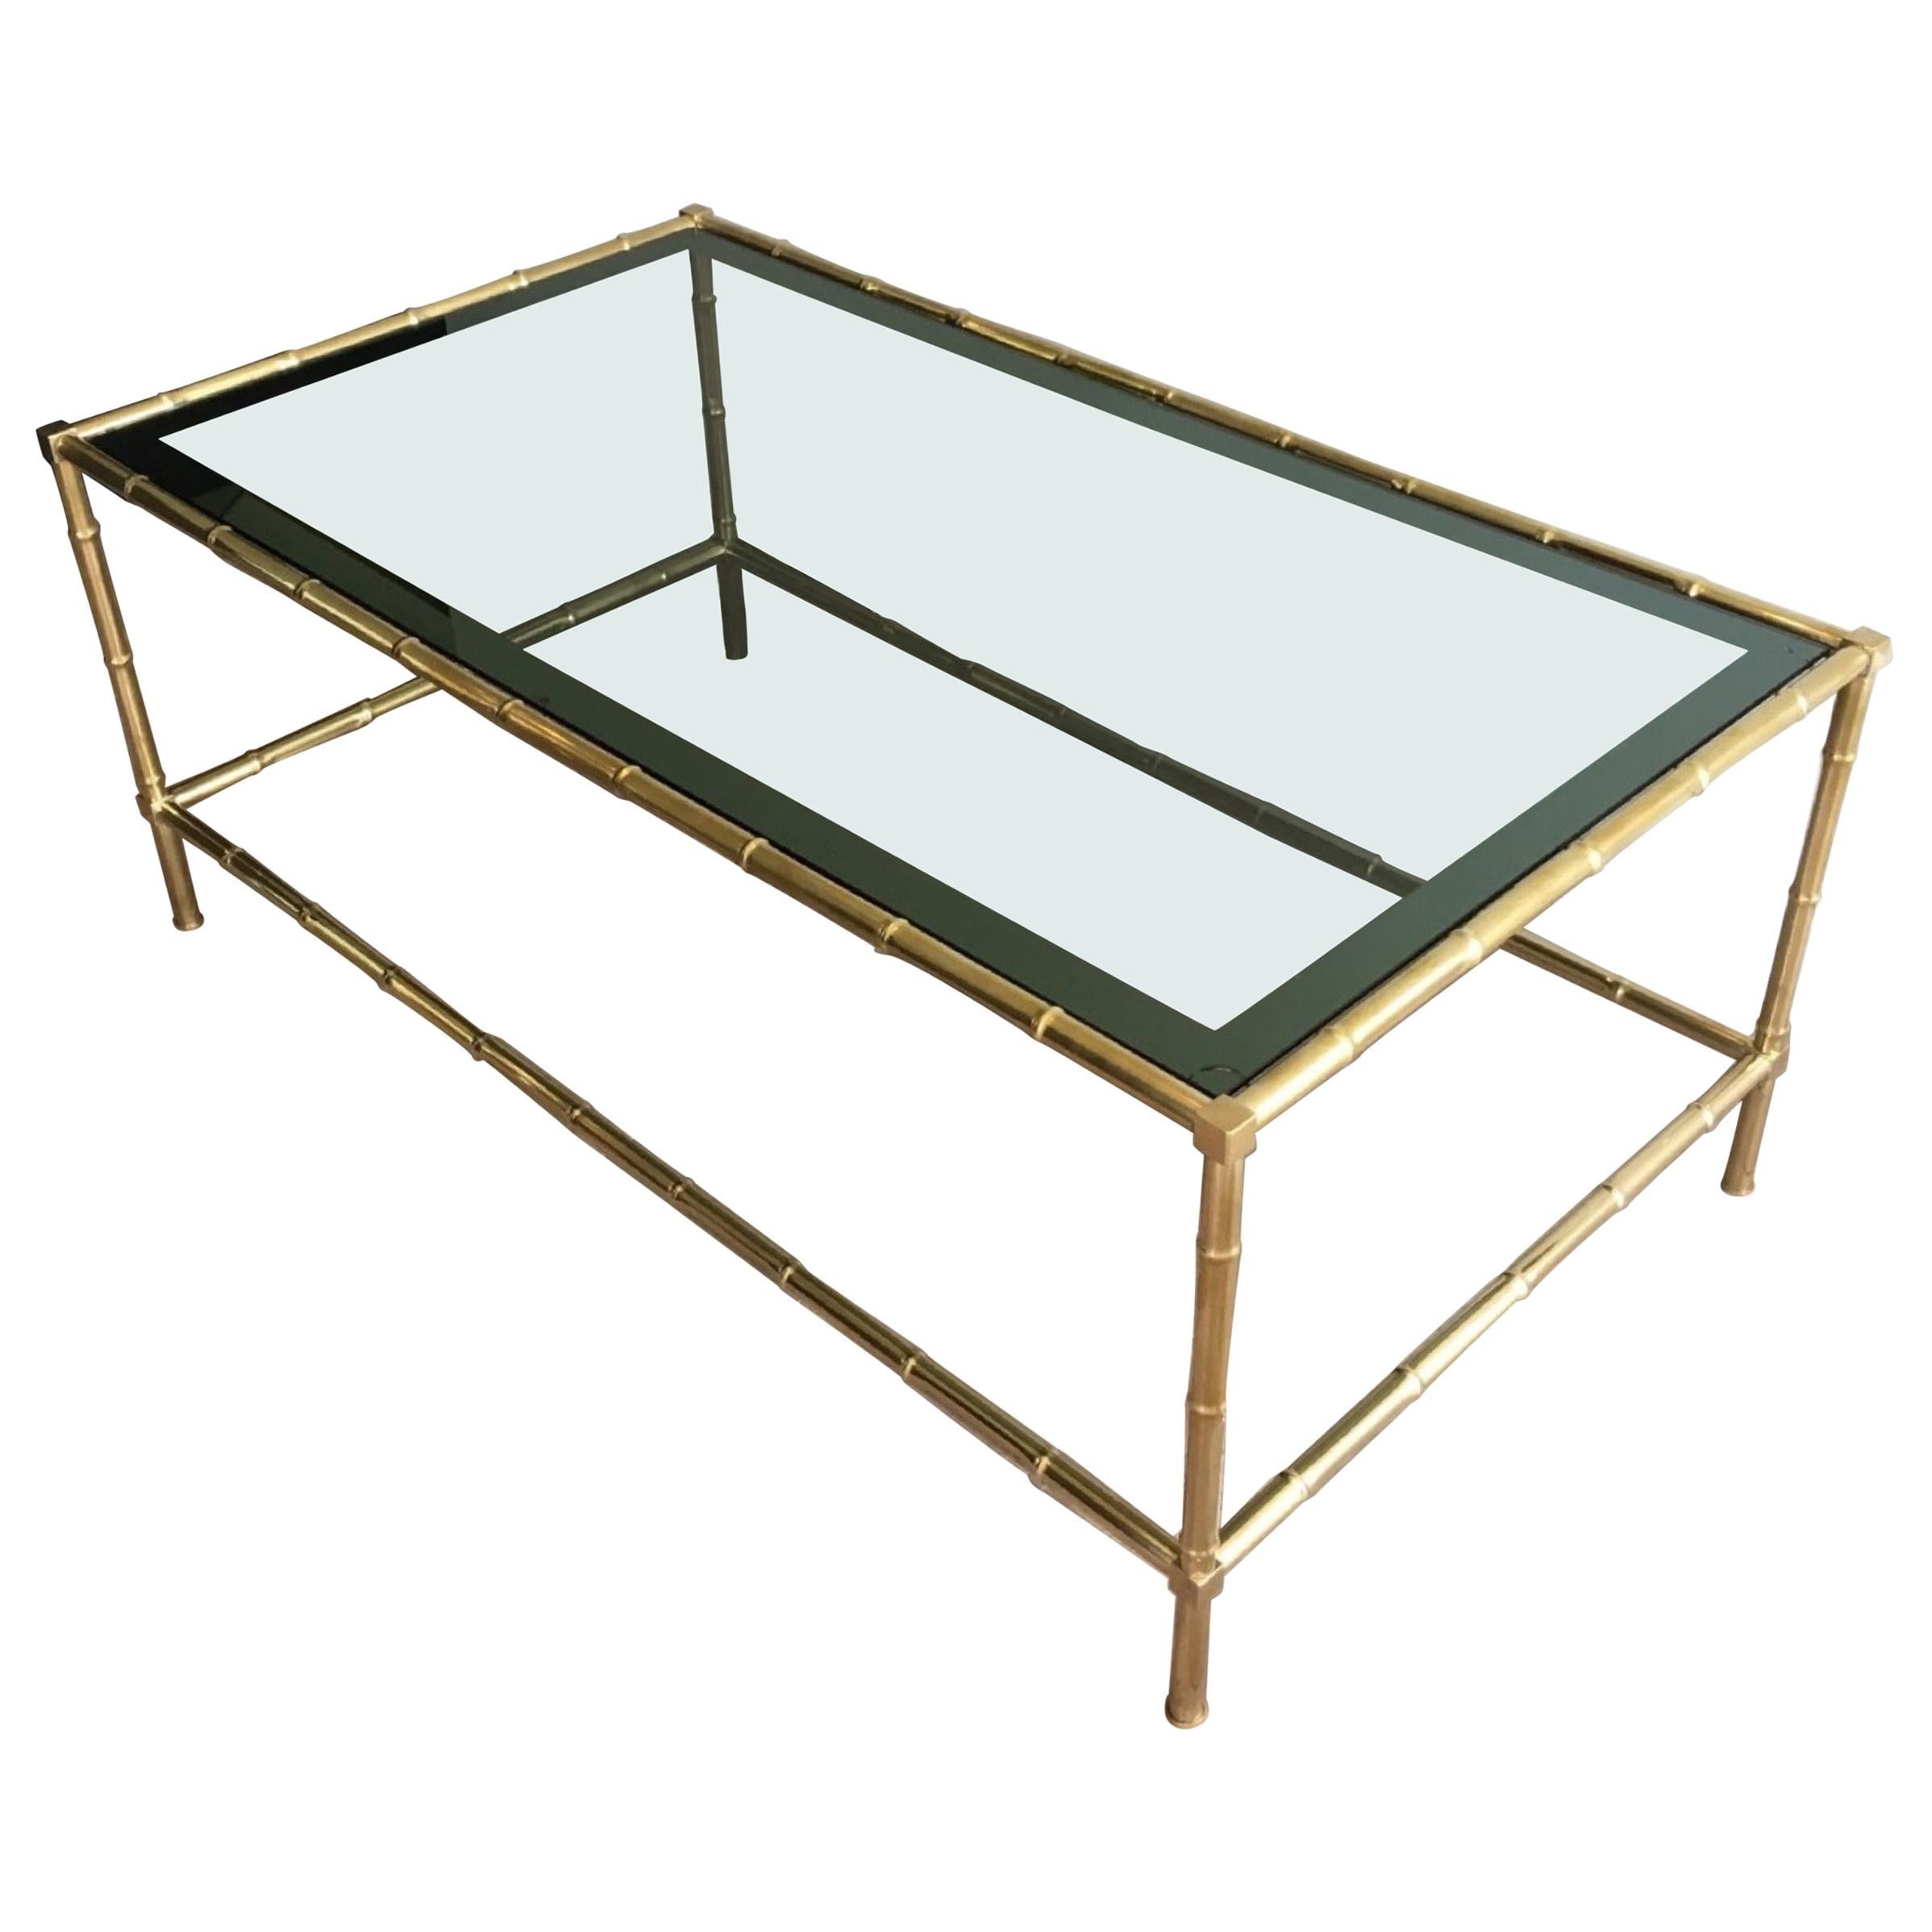 Large Faux-Bamboo Brass Coffee Table in the Style of Jacques Adnet. Circa 1970.